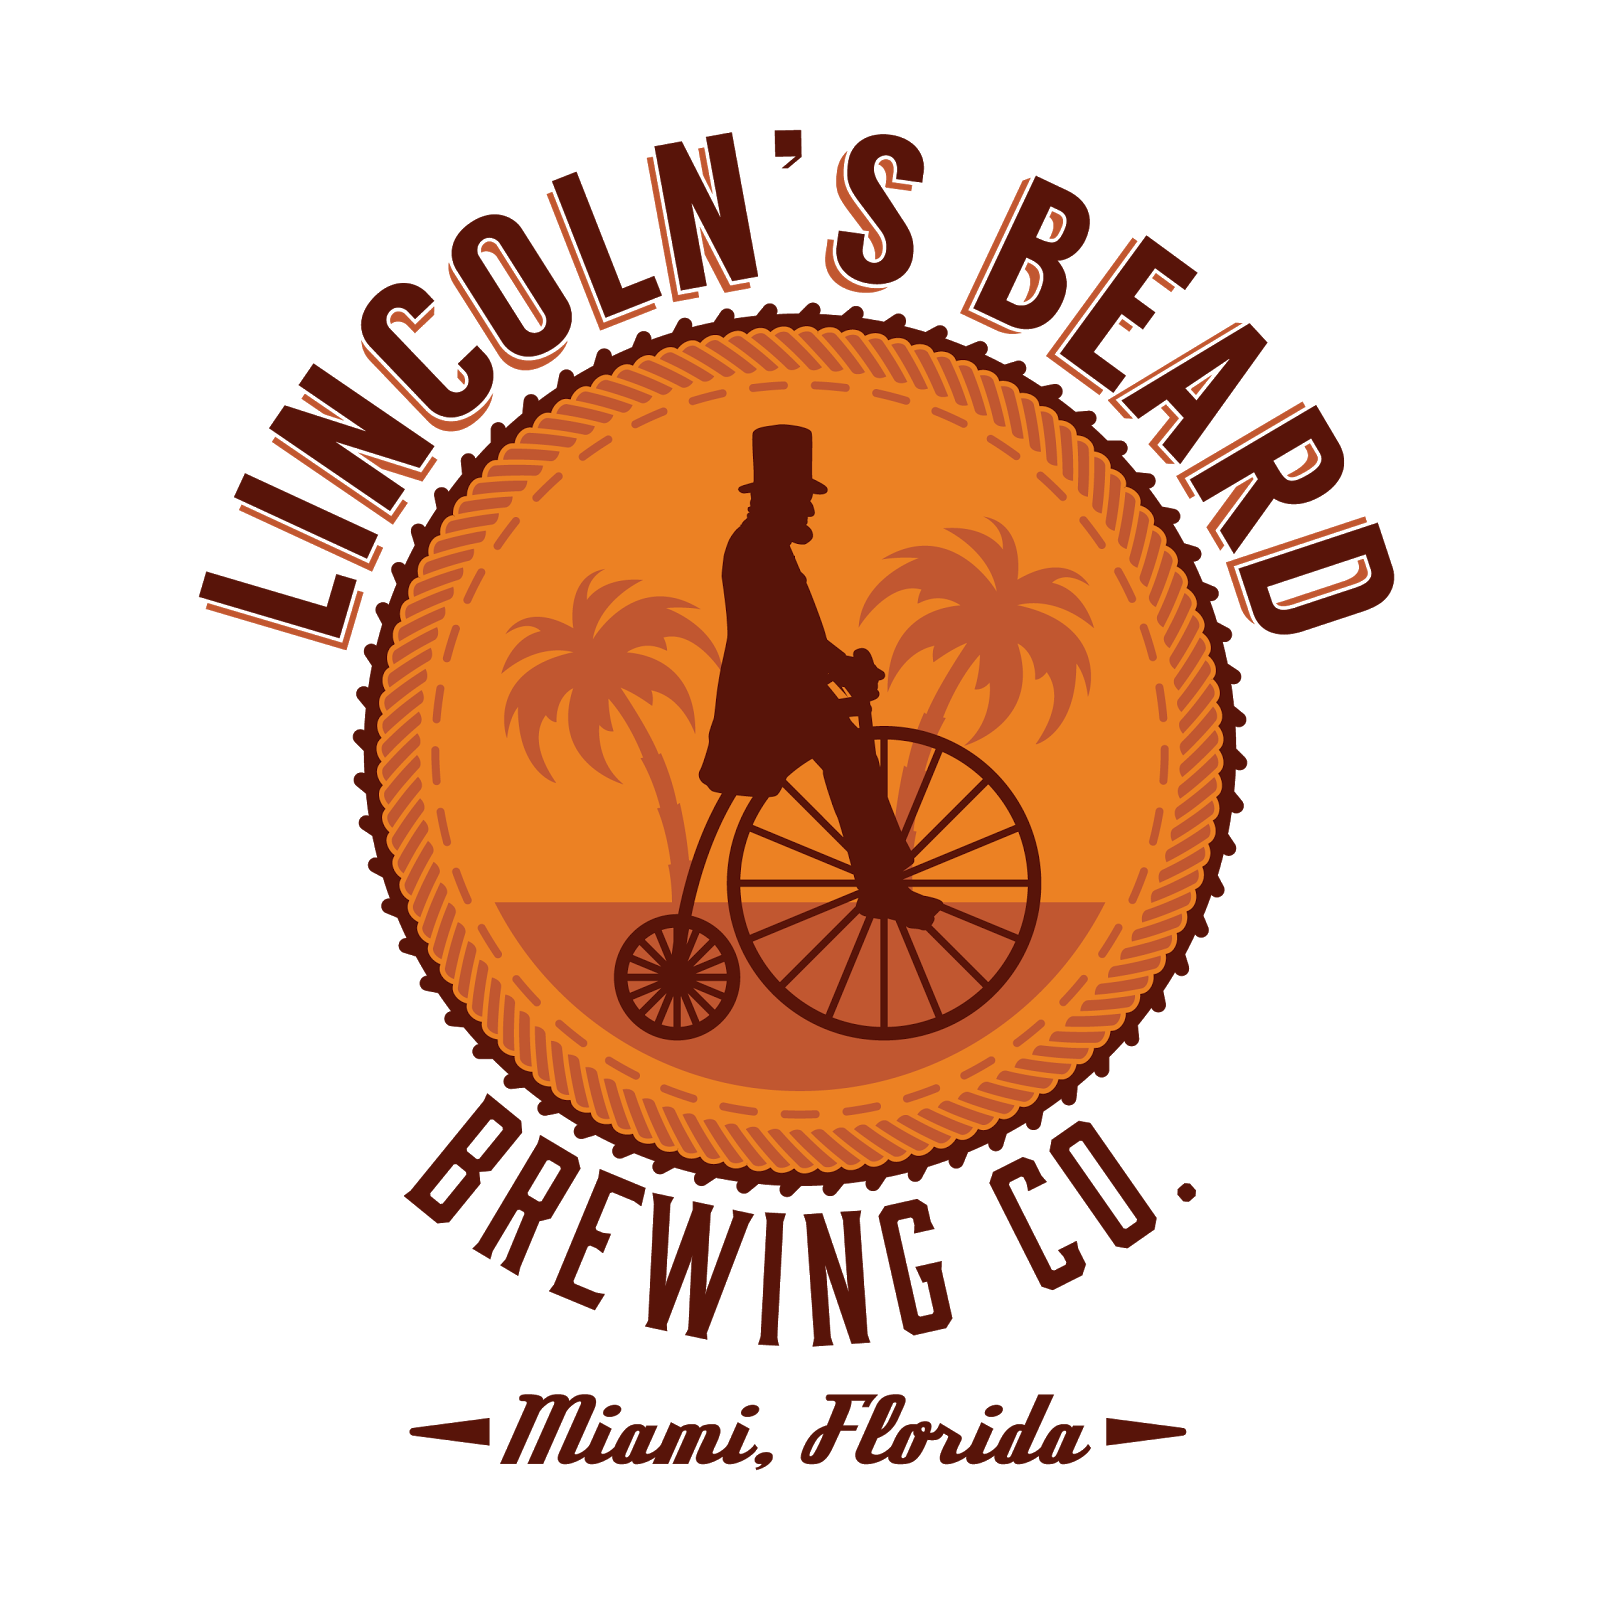 Lincoln's Beard Brewing Co.